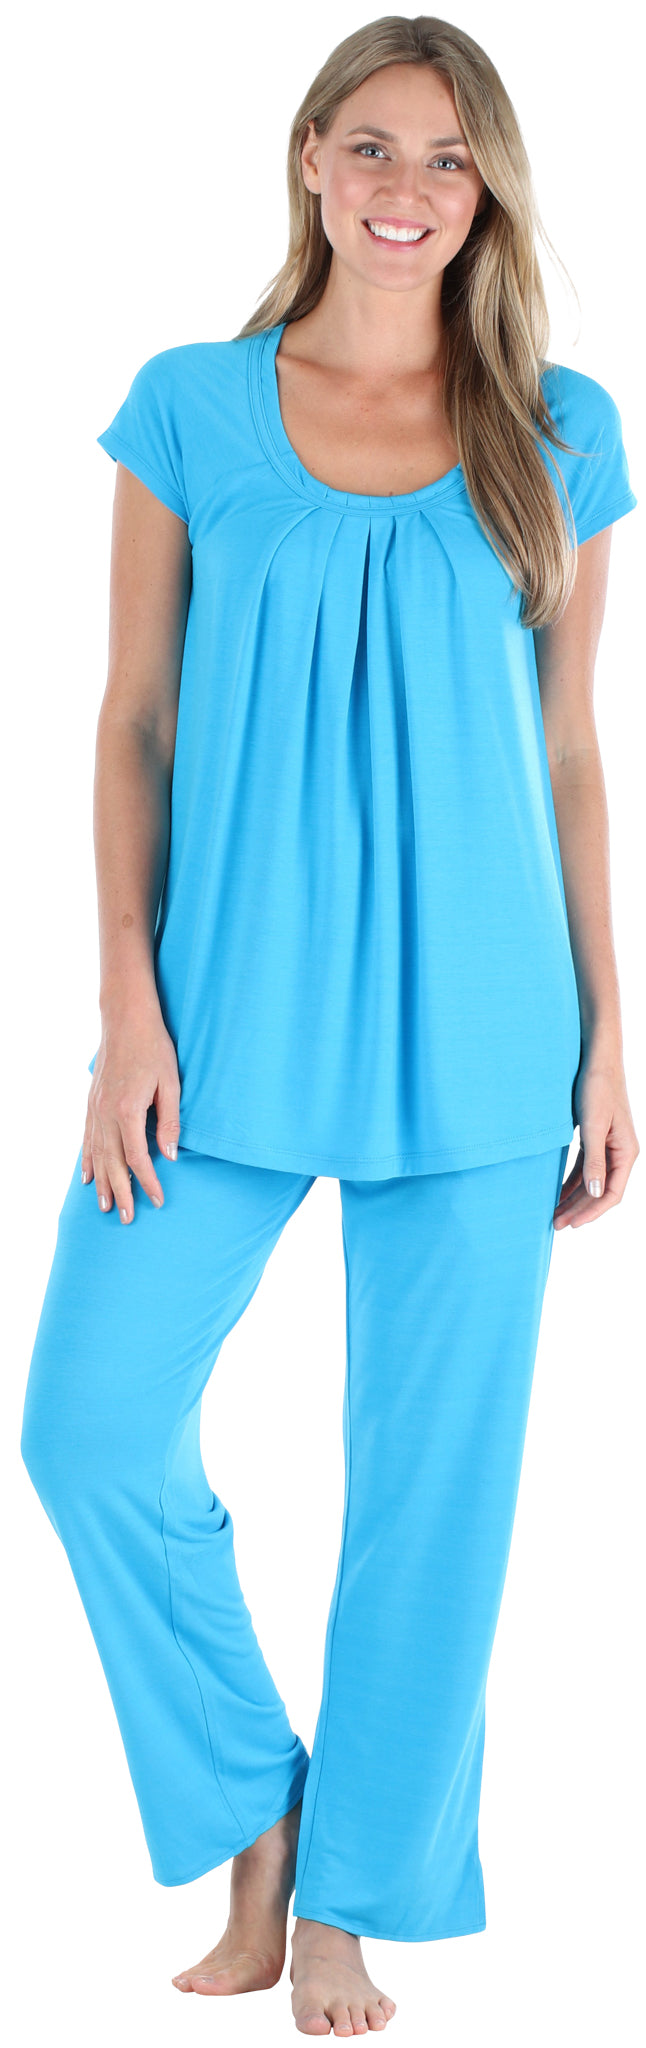 Stretchy Knit Oversized Top and Pants Set